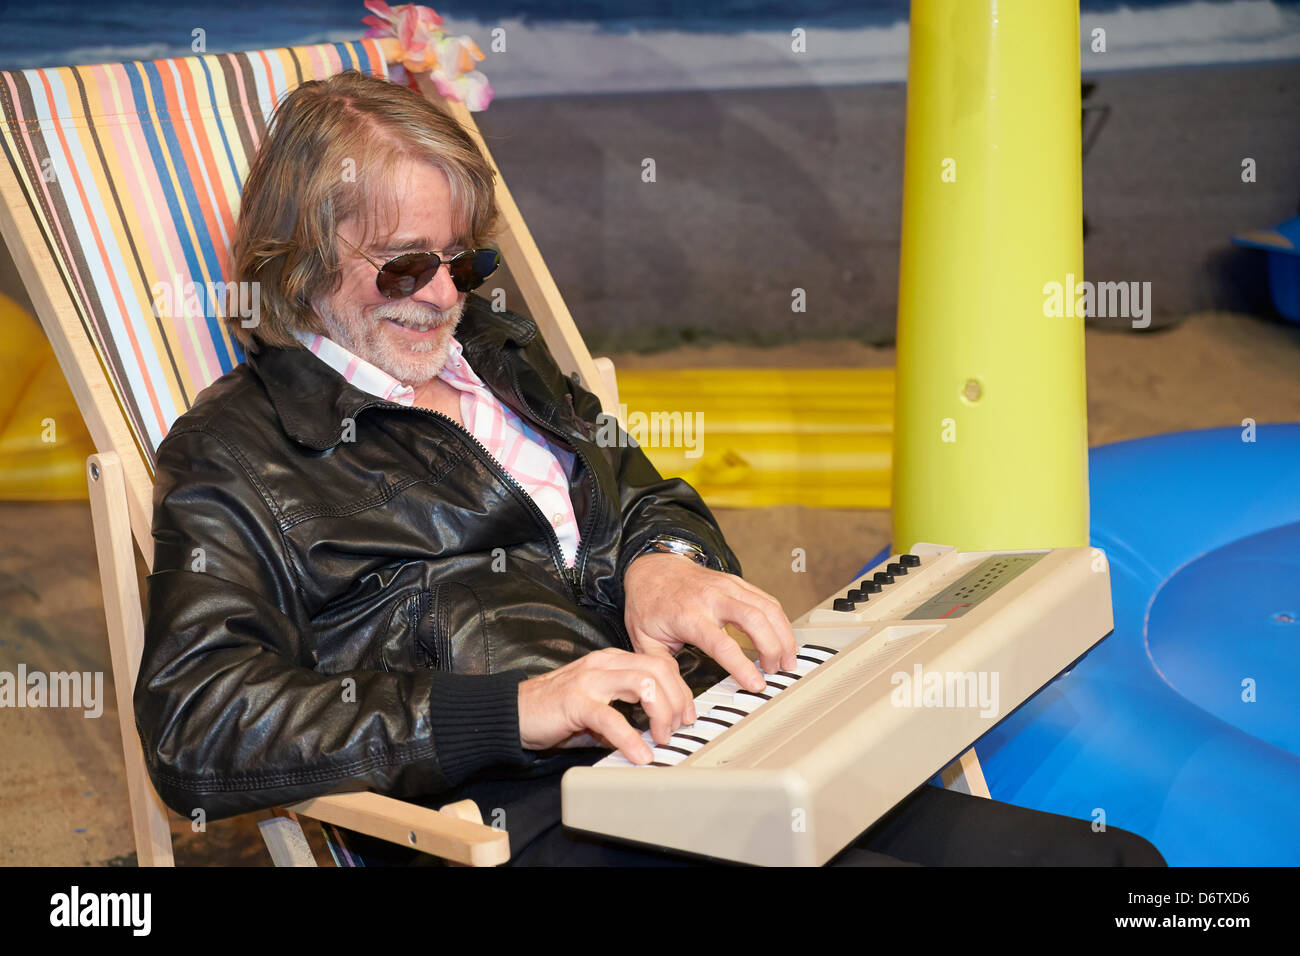 Berlin, 23th April 2013. The artist Helge Schneider at the press conference at Admiral Palace in Berlin on his tour 2013: with love in my fingers! Credit: Reynaldo Paganelli / Alamy Live News Stock Photo